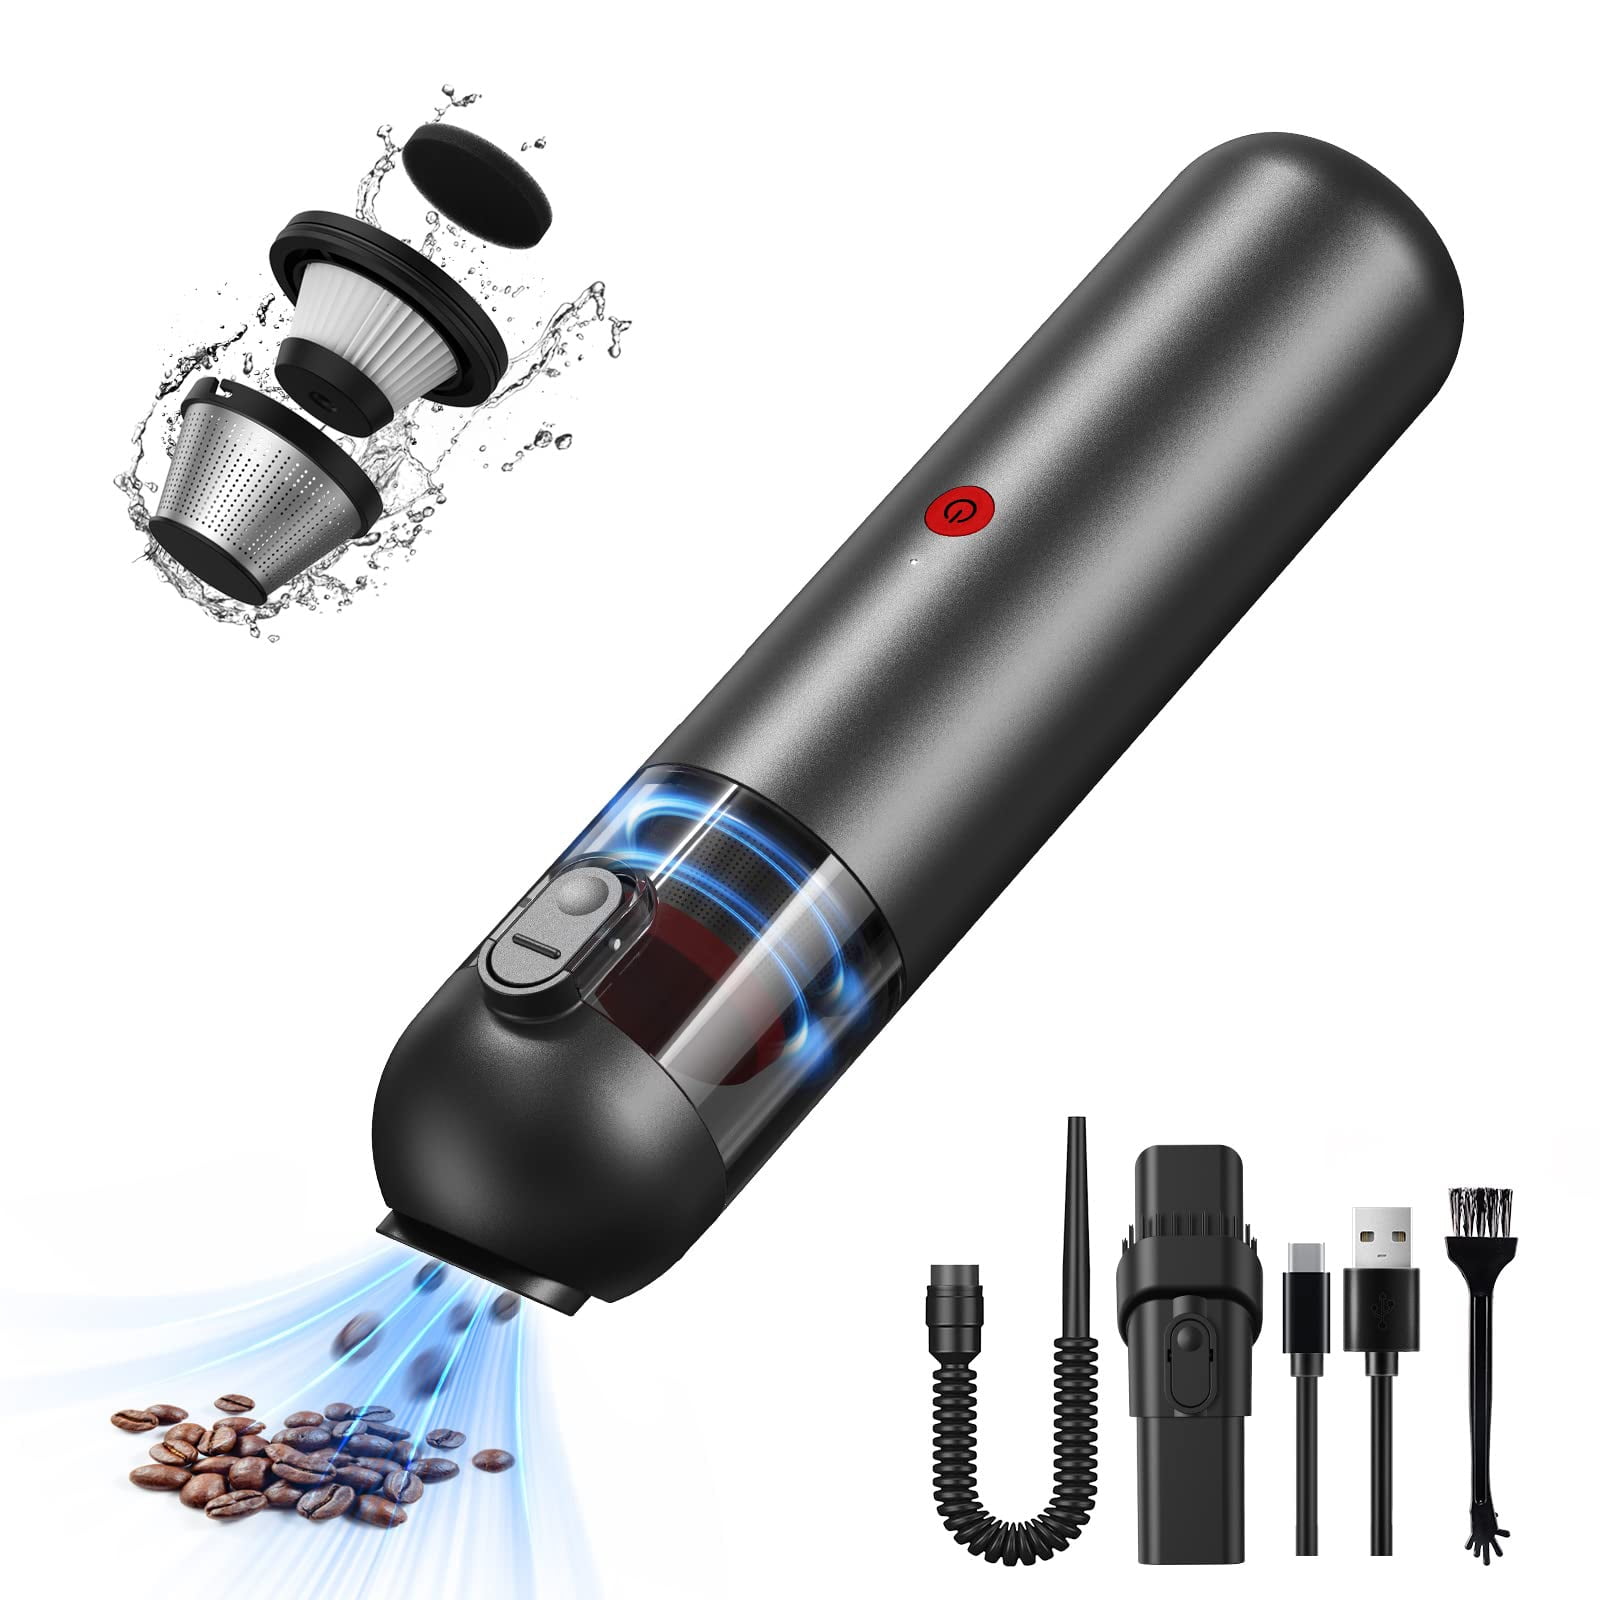 Glossy auto parts handheld Vacuums,car Vacuum Cleaner, 8000PA Strong  Suction, 120W High Power, Wet & Dry Use, Quick Cleaning for  House,Office&Car 